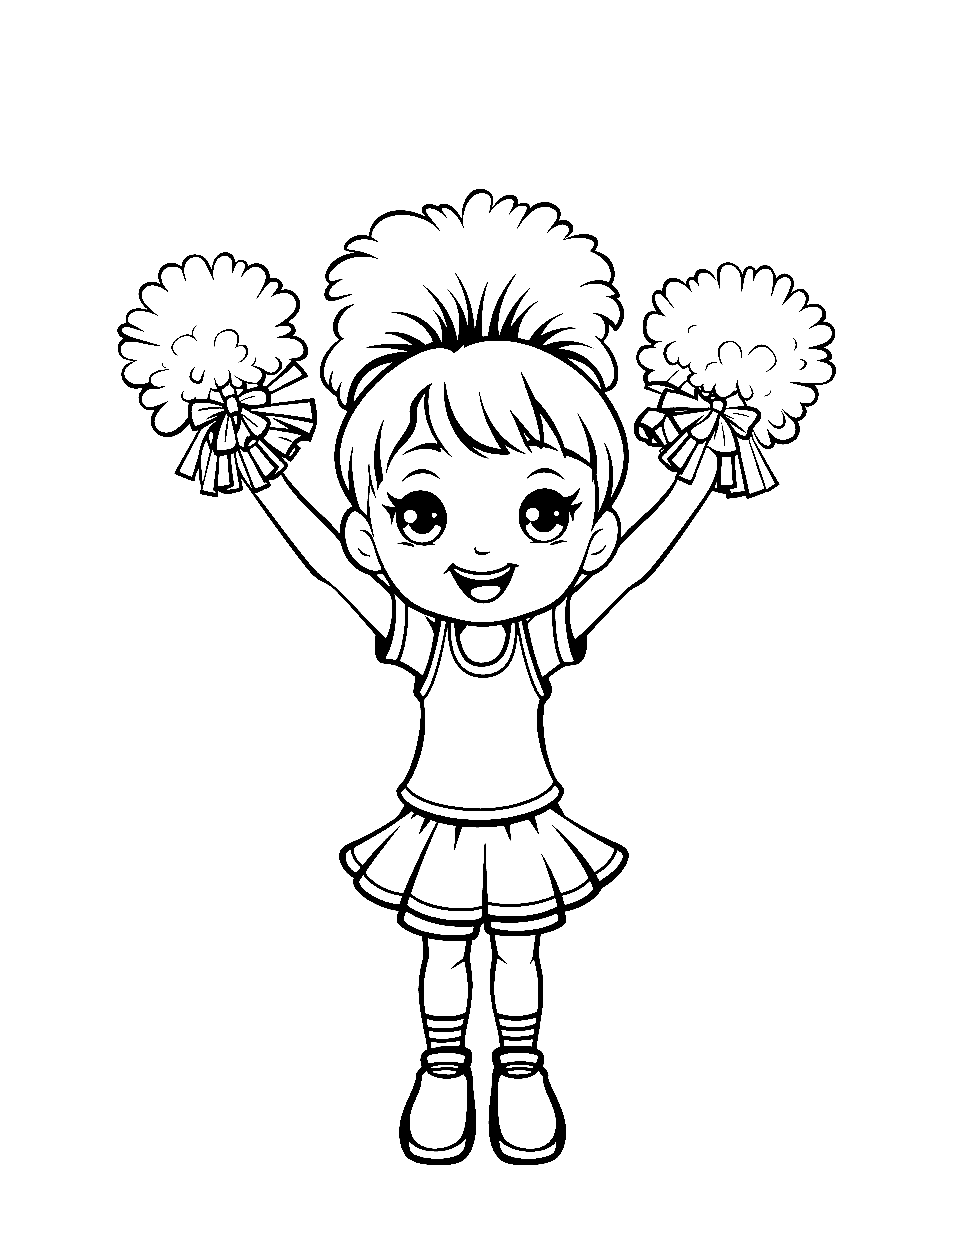 Cheerful Cheerleader Coloring Page - A cheerleader with pom-poms cheering on the sideline.